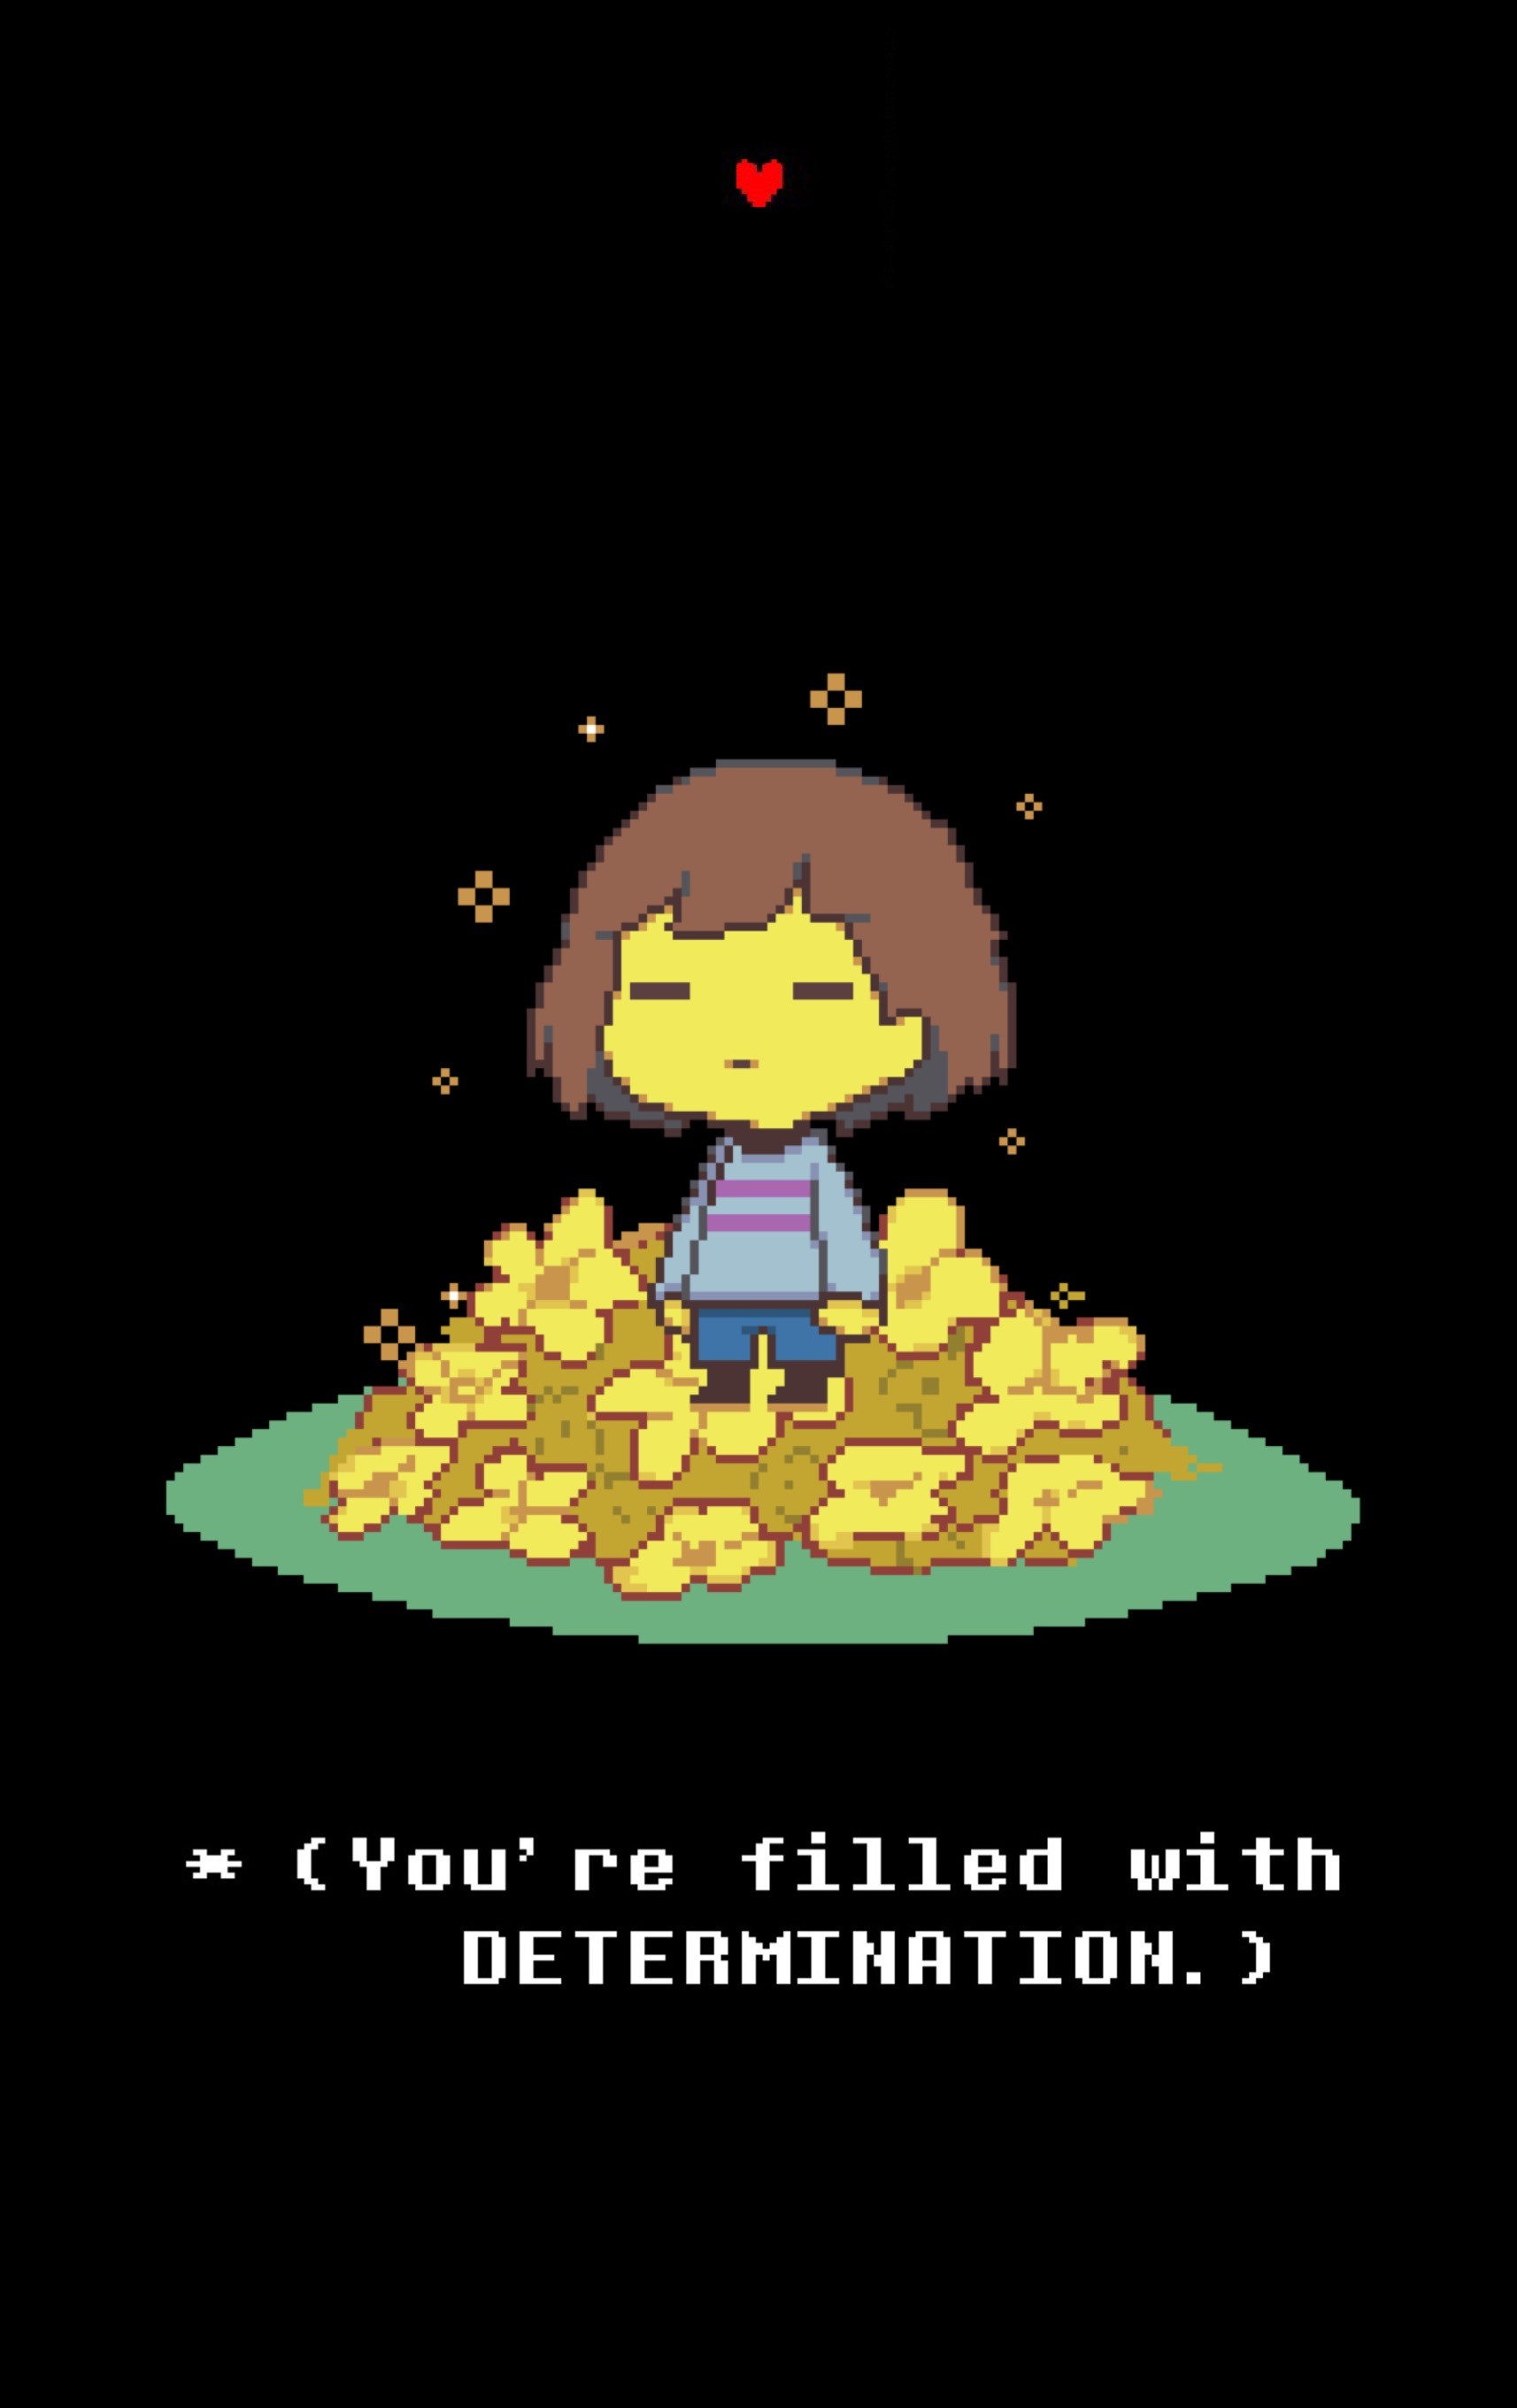 My Undertale iPhone wallpaper Credits to boorim on Deviantart for the lovely Frisk pixel art